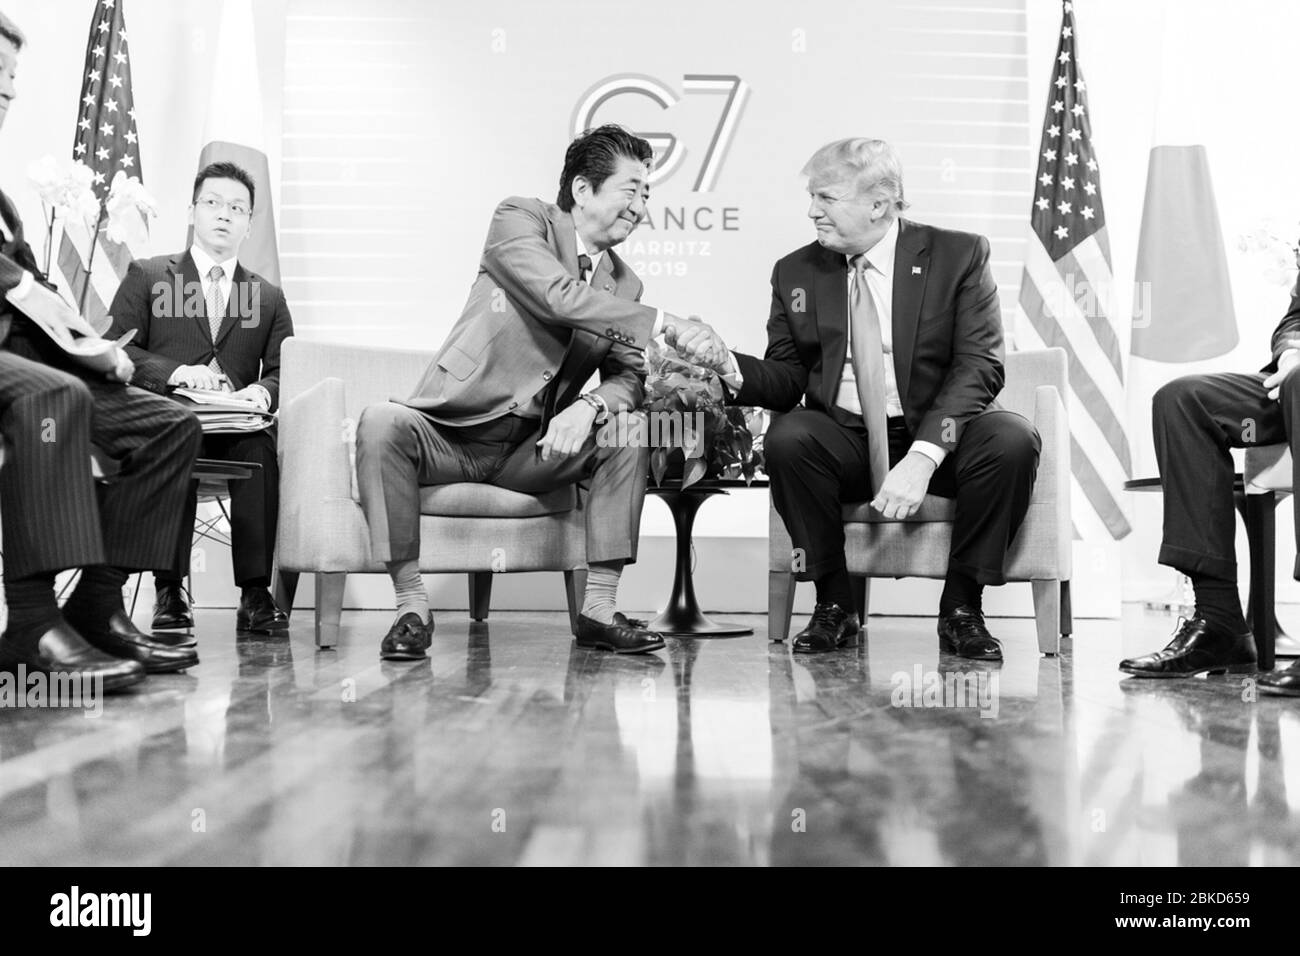 President Donald J. Trump and Prime Minister of Japan Shinzo Abe, joined by their delegation members, participate in a bilateral meeting at the Centre de Congrés Bellevue Sunday, Aug. 25, 2019, in Biarritz, France, site of the G7 Summit. #G7Biarritz Stock Photo